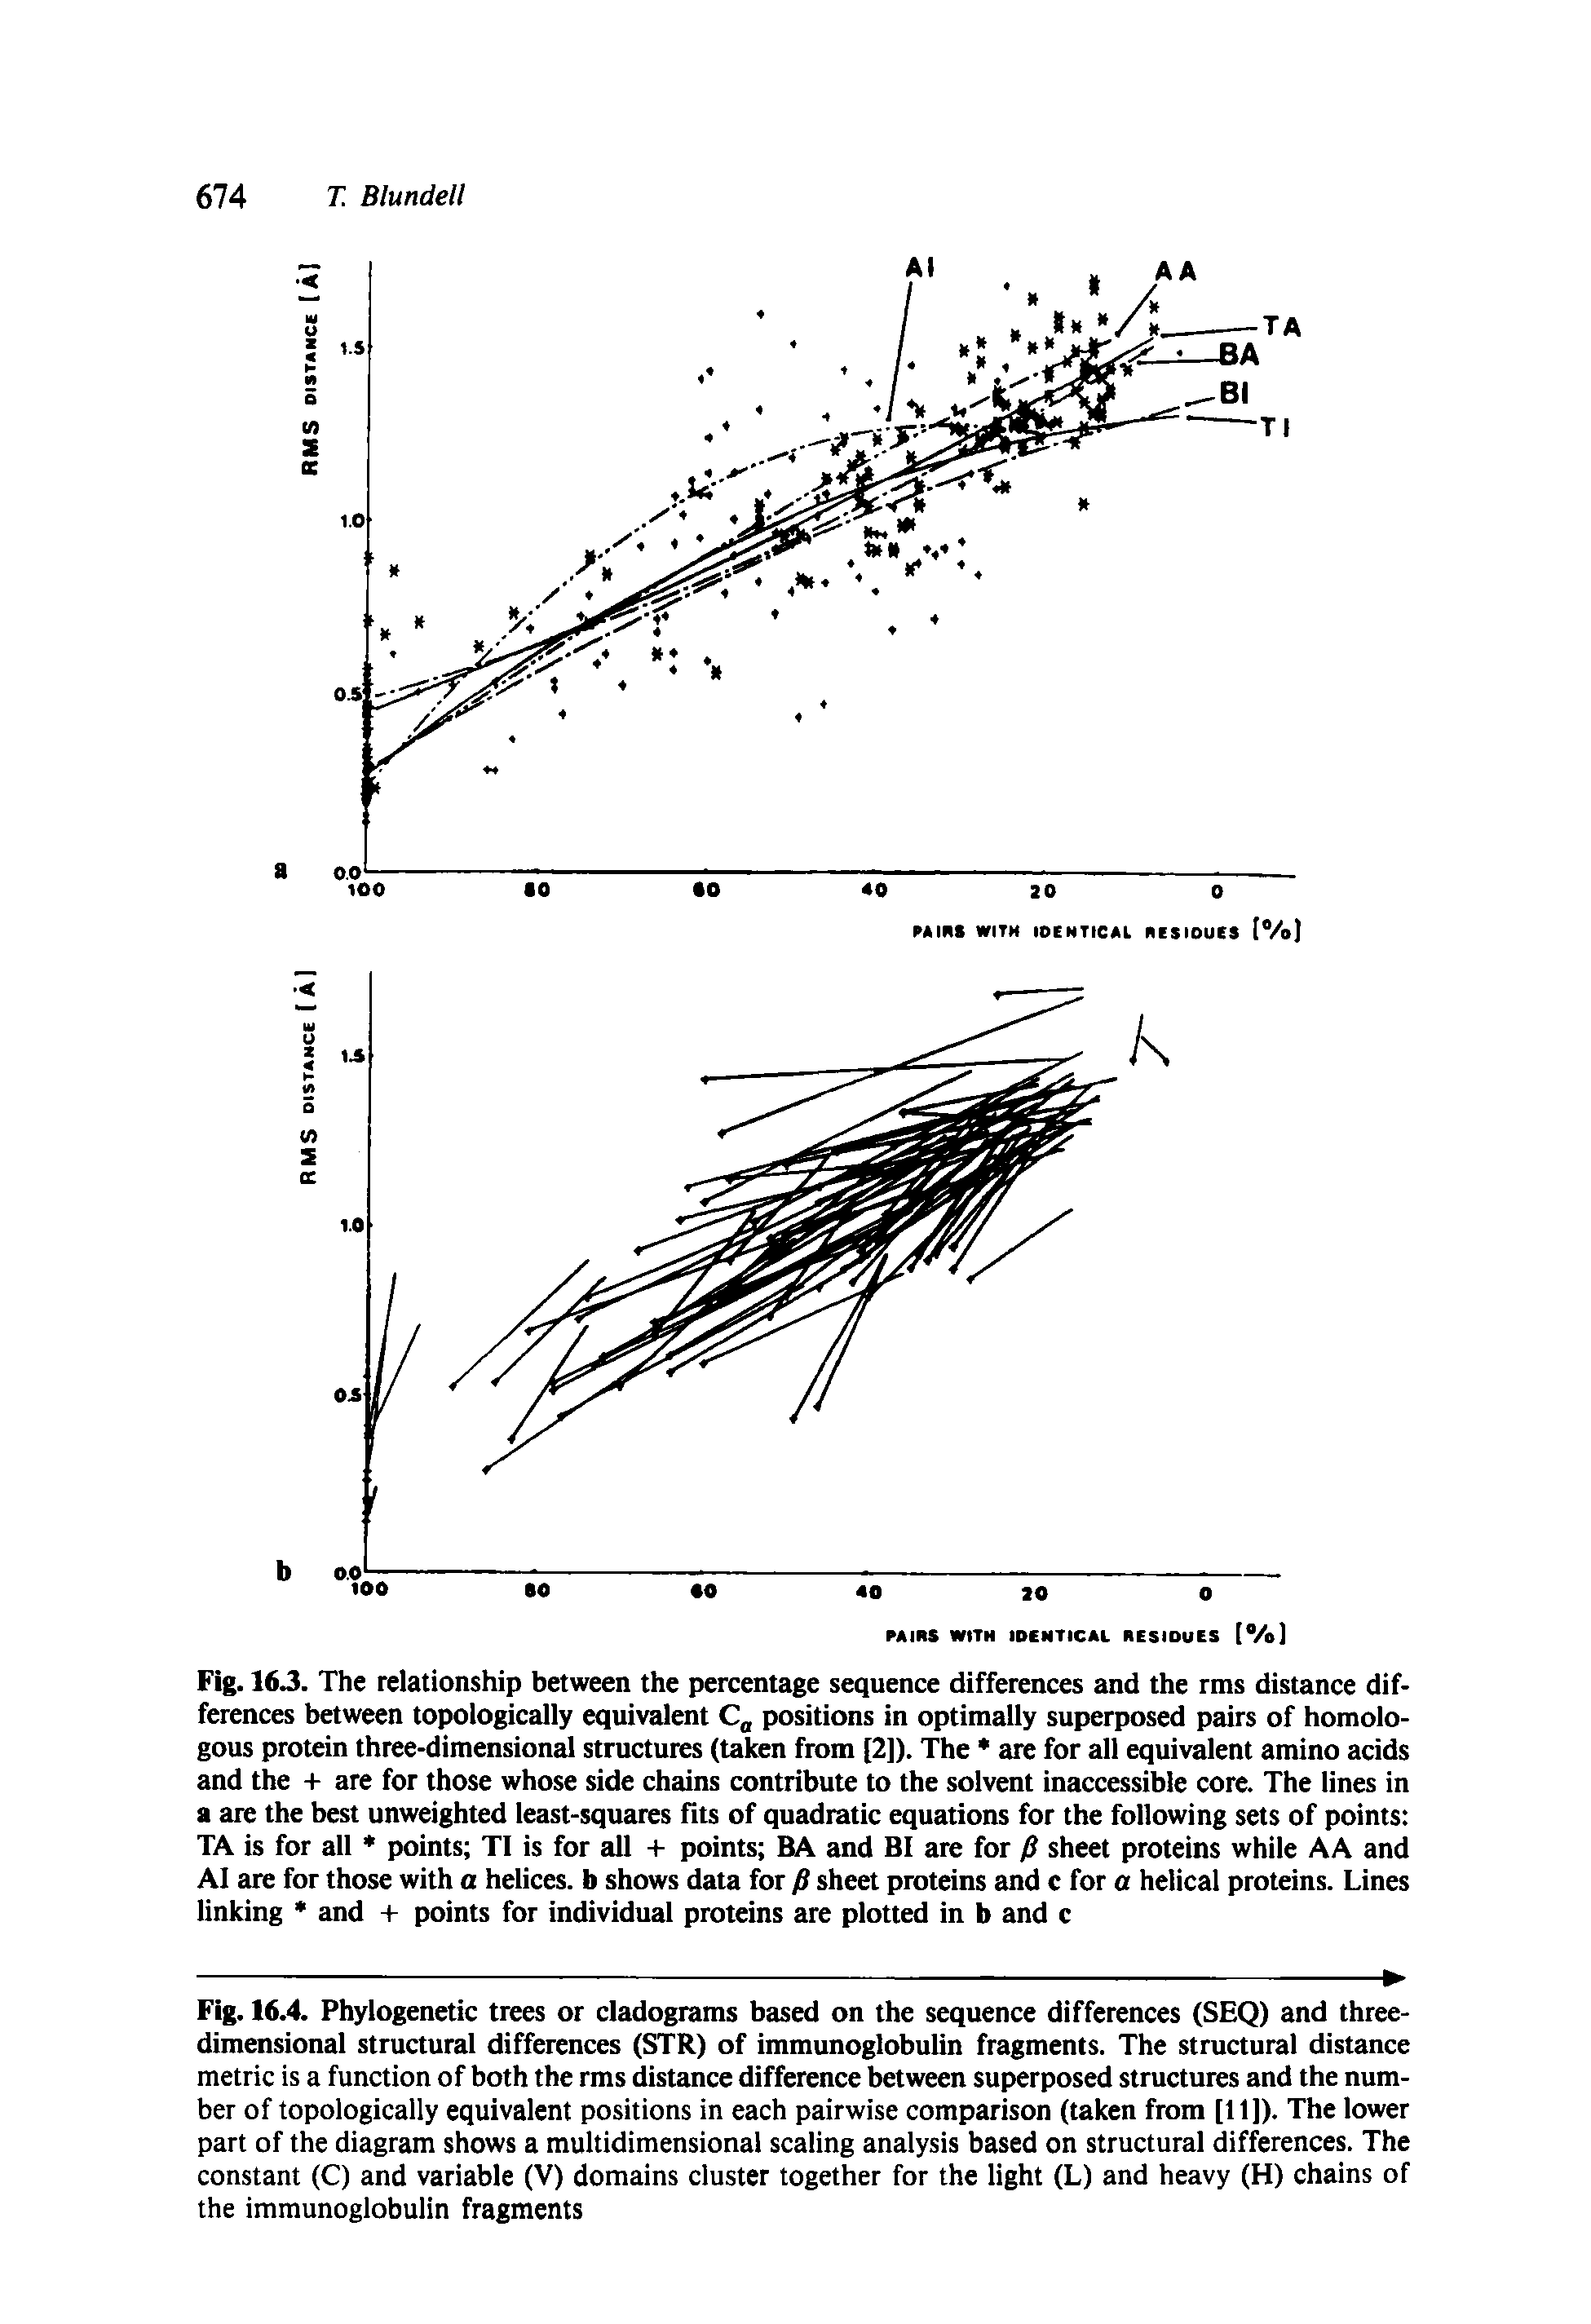 Fig. 16J. The relationship between the percentage sequence differences and the rms distance differences between topologically equivalent C positions in optimally superposed pairs of homologous protein three-dimensional structures (taken from [2]). The are for all equivalent amino acids and the + are for those whose side chains contribute to the solvent inaccessible core. The lines in a are the best unweighted least-squares fits of quadratic equations for the following sets of points TA is for all points TI is for all + points BA and BI are for P sheet proteins while AA and AI are for those with a helices, b shows data for P sheet proteins and c for a helical proteins. Lines linking and + points for individual proteins are plotted in b and c...